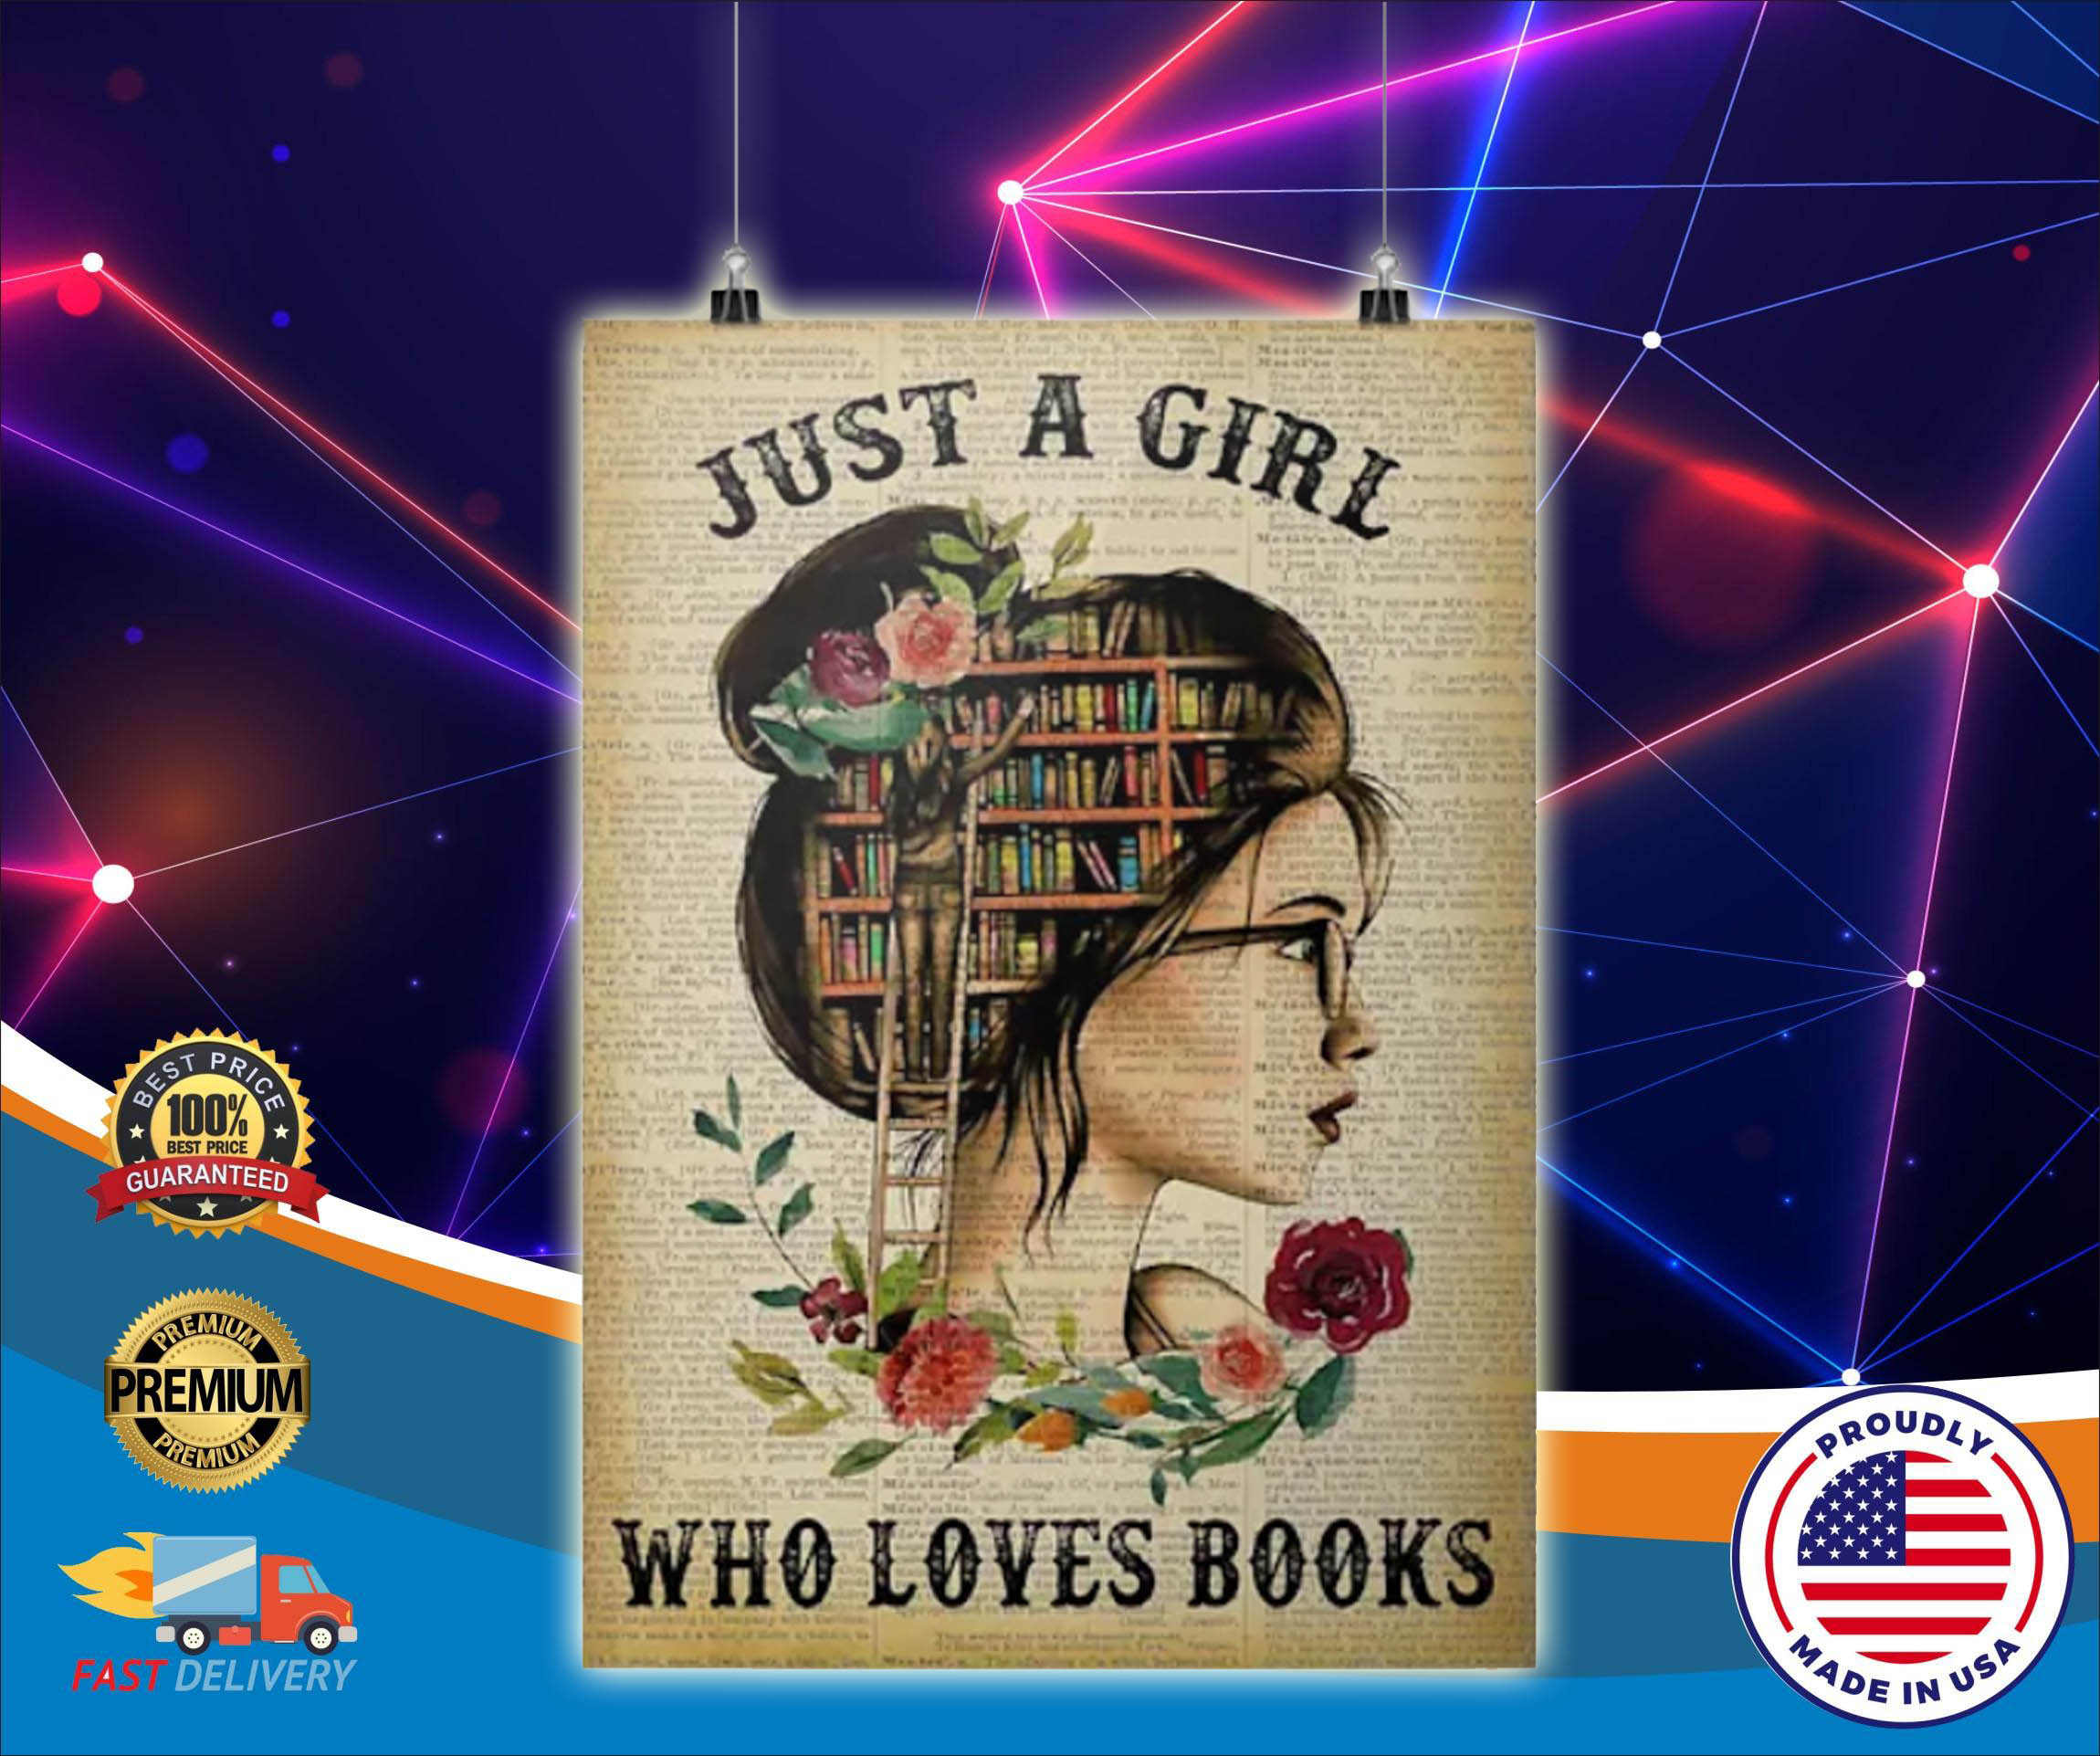 Just a girl who loves books cool poster